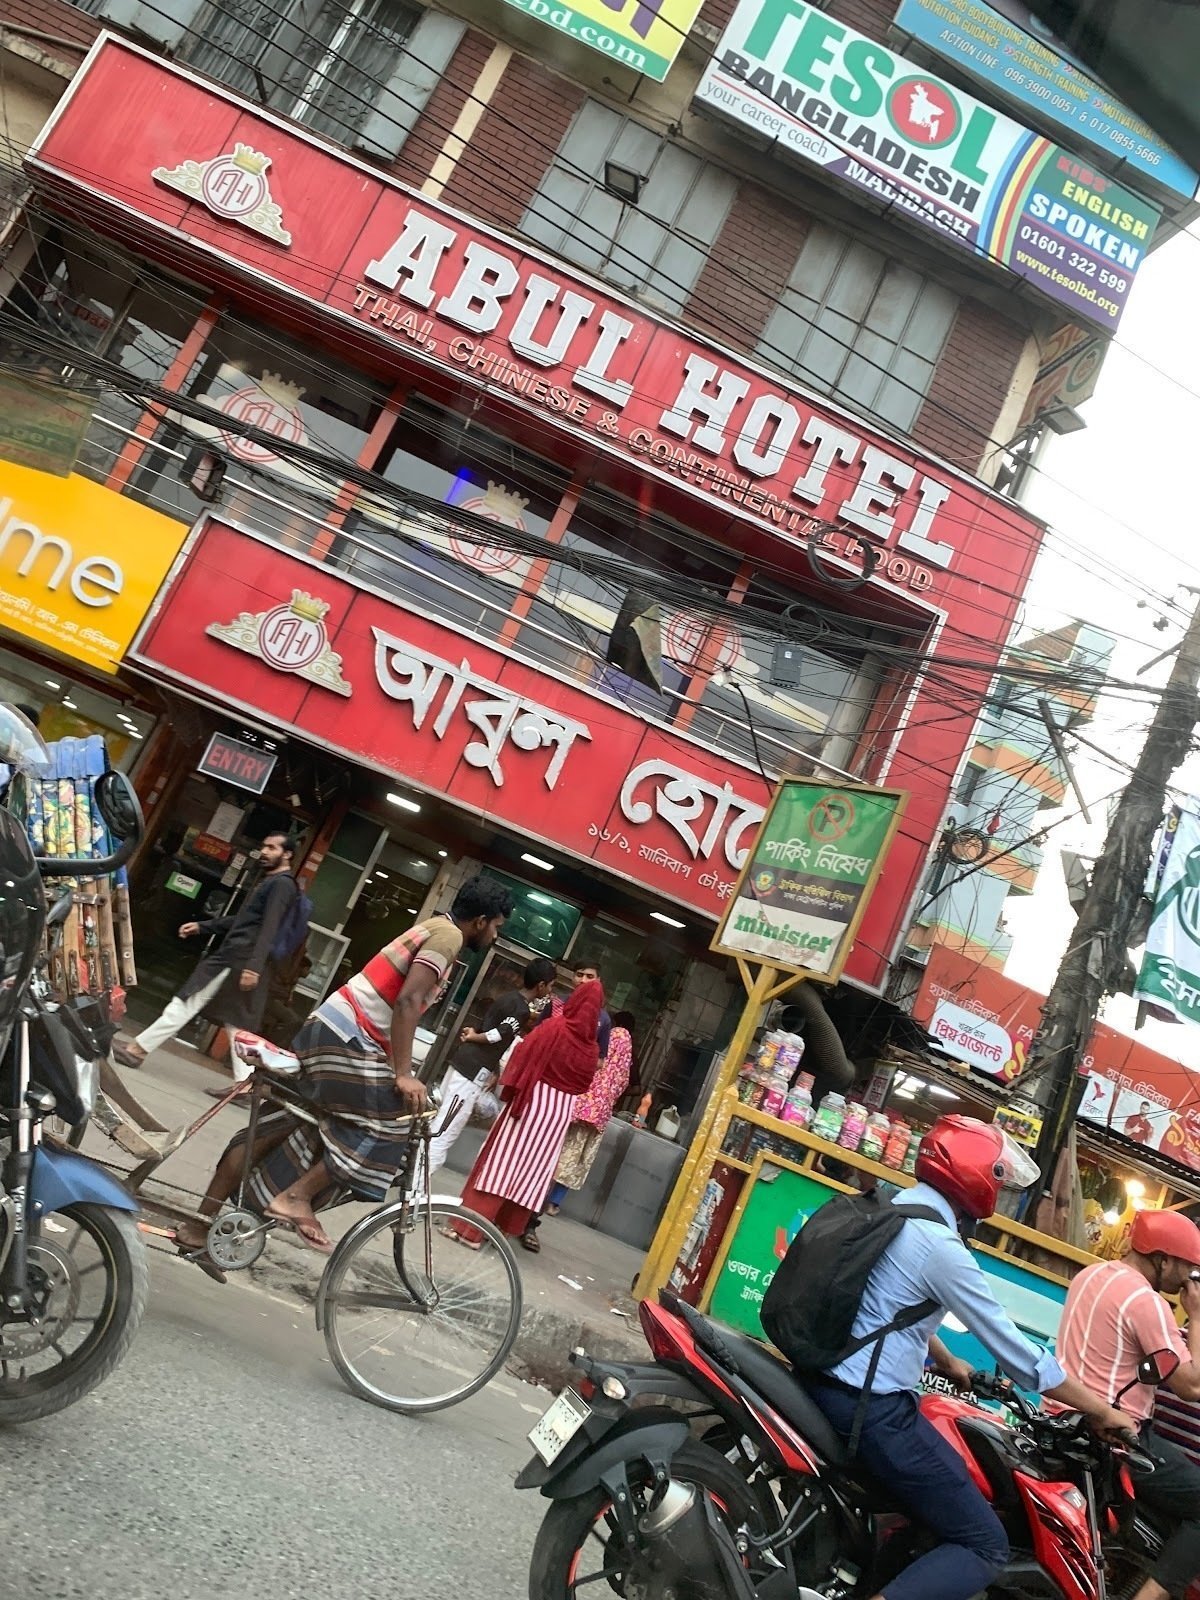 <span class="translation_missing" title="translation missing: en.meta.location_title, location_name: Abul Hotel, city: Dhaka">Location Title</span>